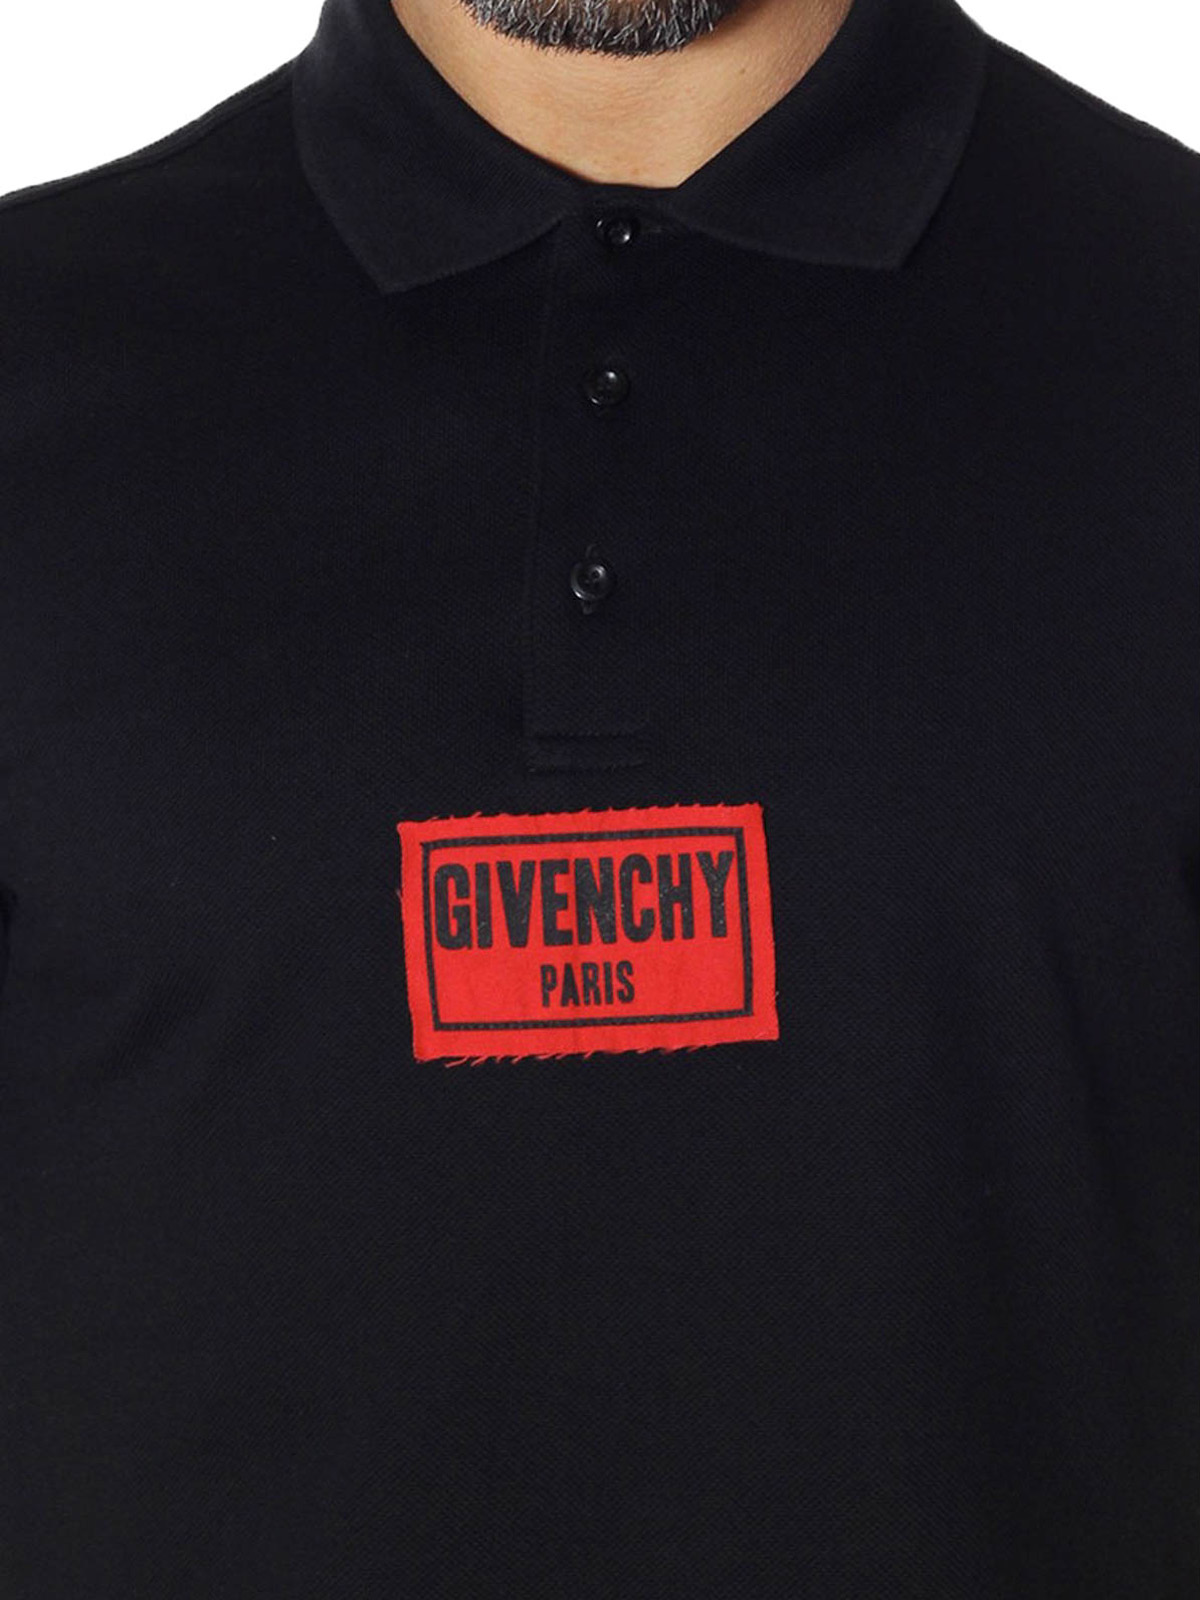 givenchy polo shirt red